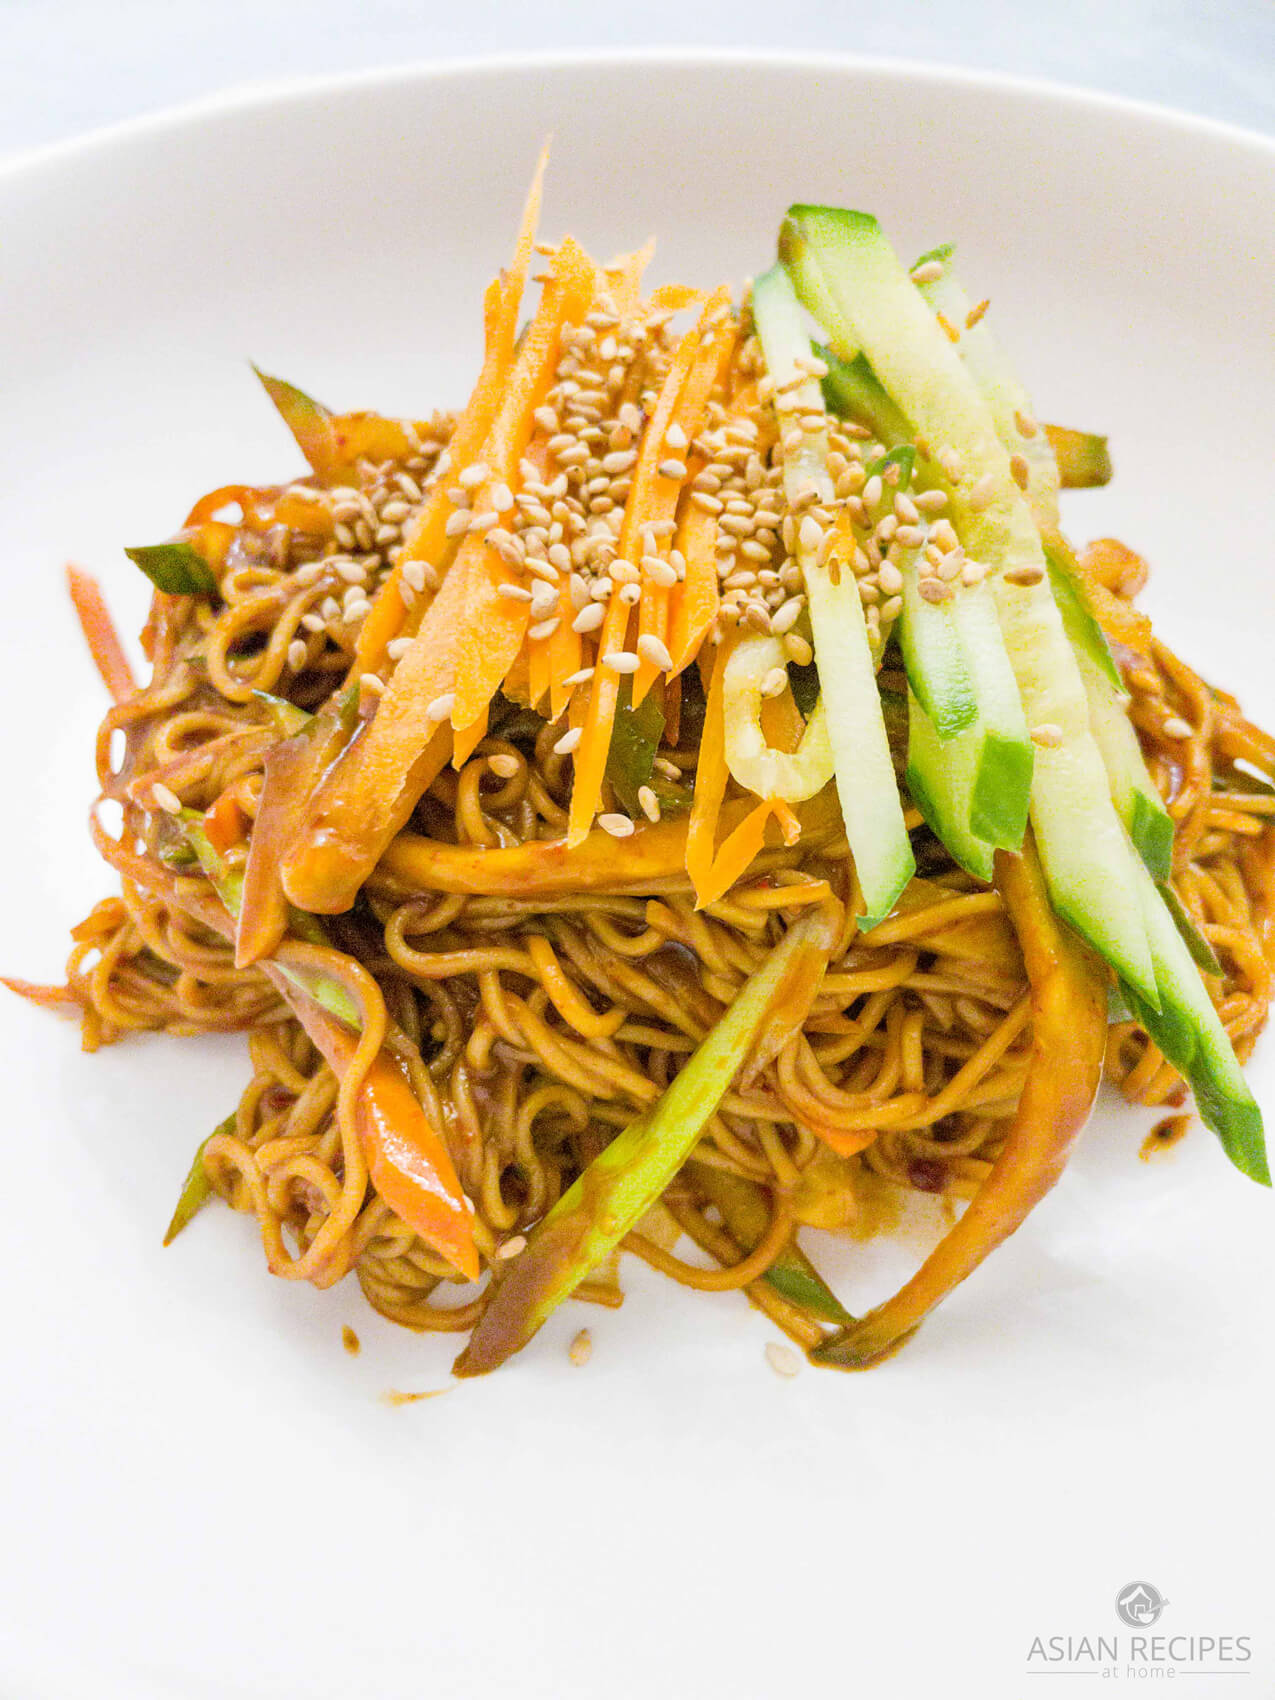 Noodles covered in a spicy gochujang sauce is the perfect cold noodle bowl to have during Summer!